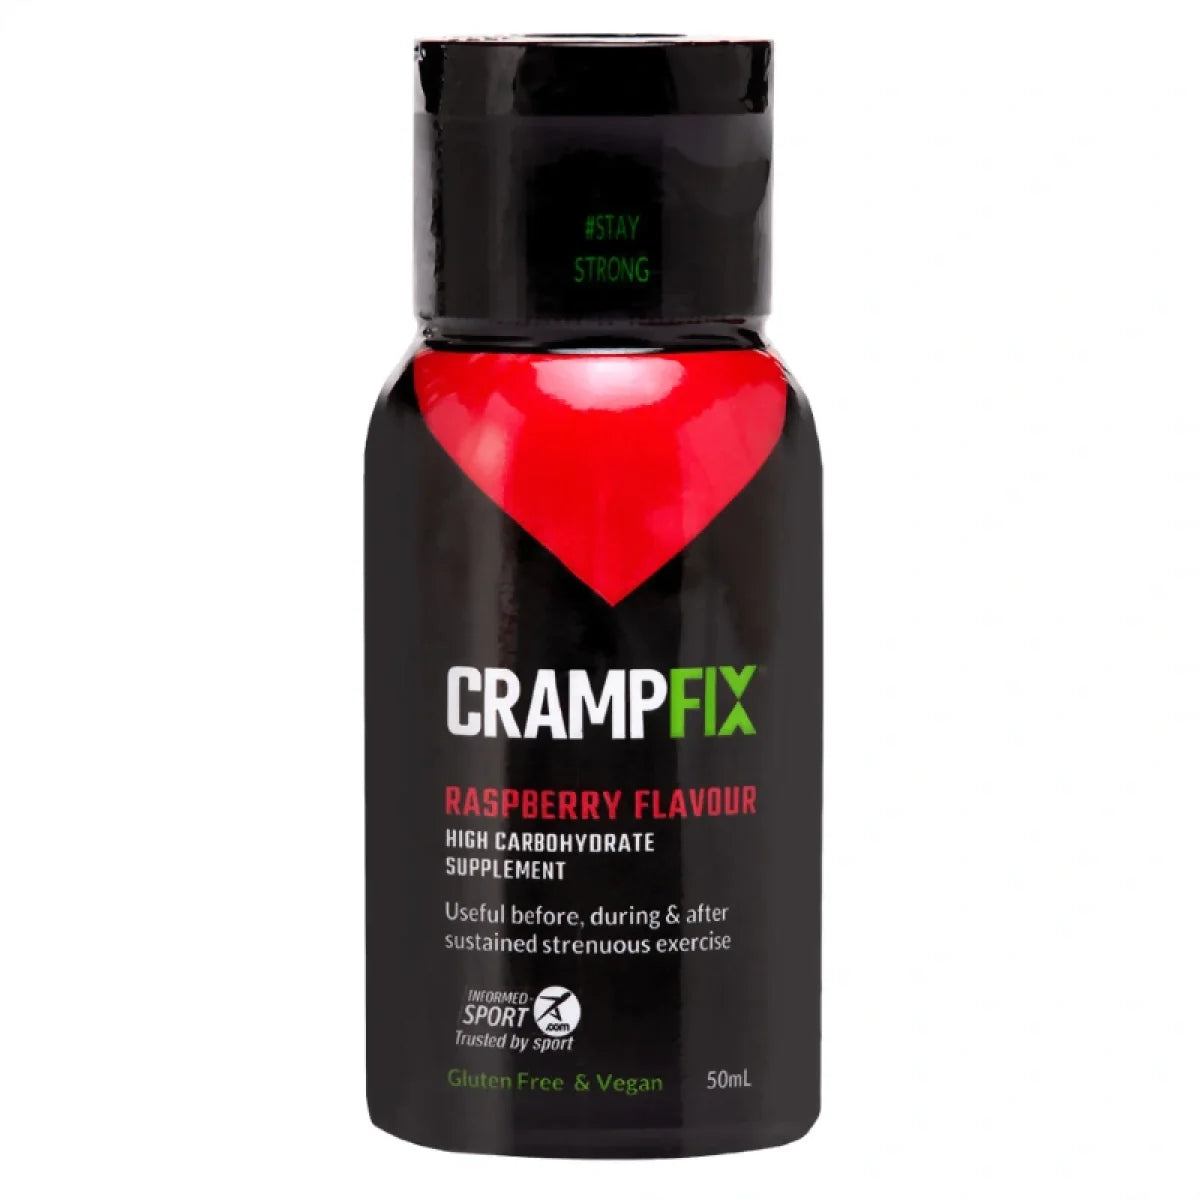 CrampFix High Carbohydrate Supplement